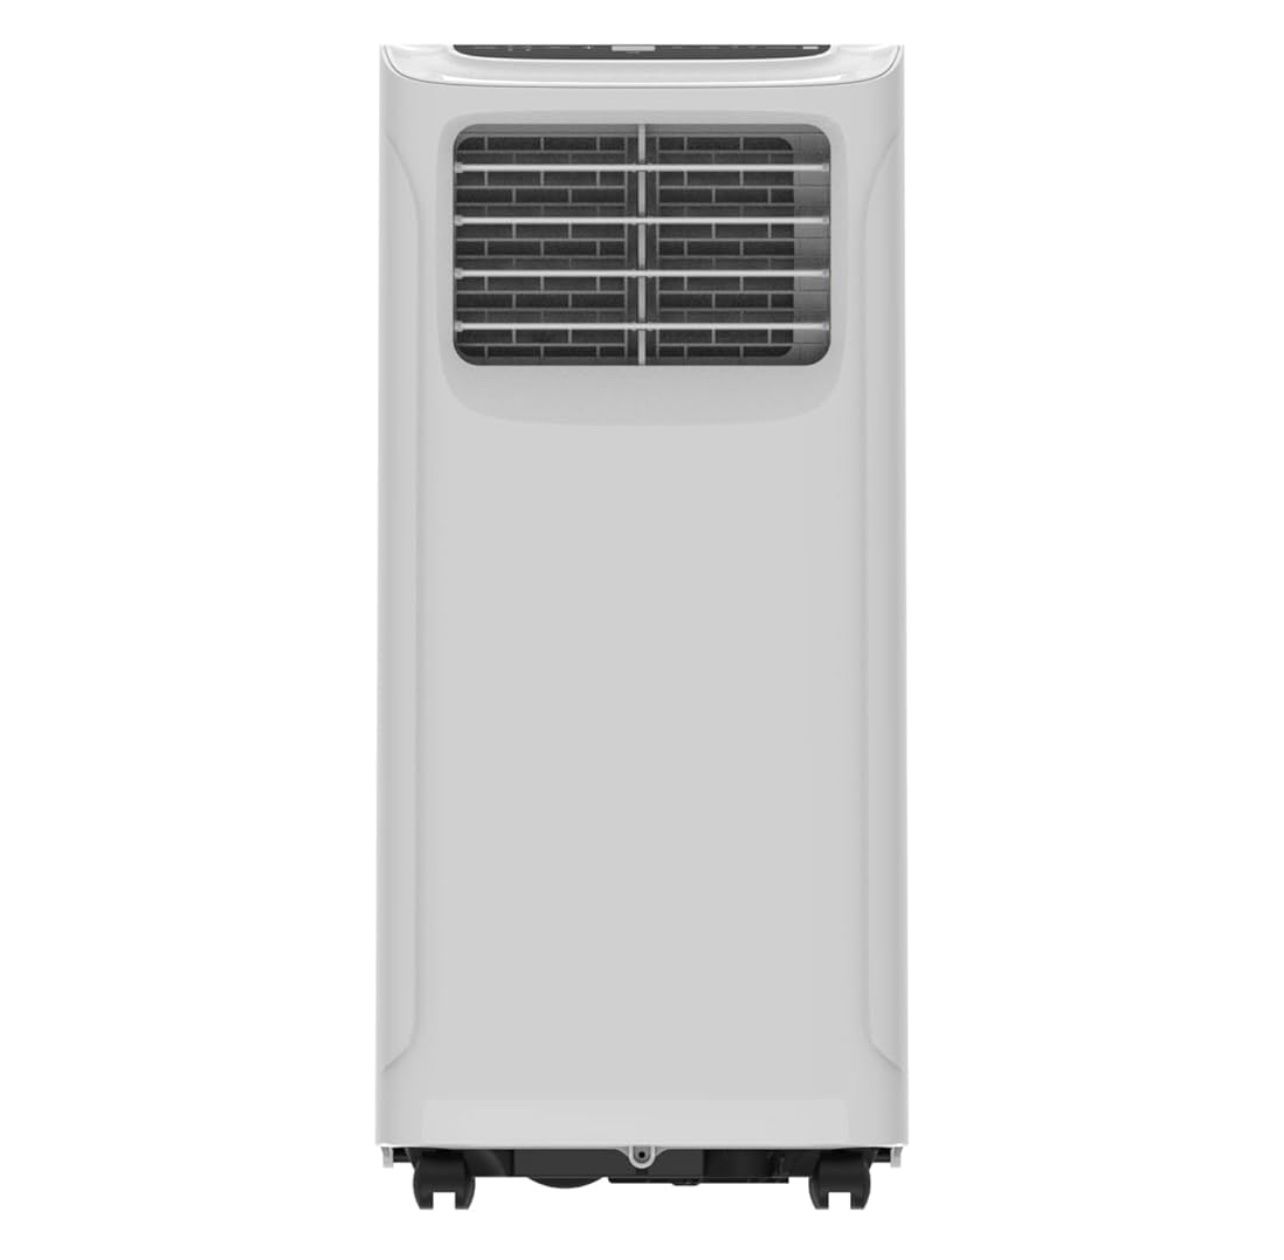 Ivation Compact Portable Air Conditioner | Smallest 9000 BTU AC Unit with Powerful Cooling, Multi-Speed Fan, Dehumidifier, Sleep Mode, Built-In Timer,